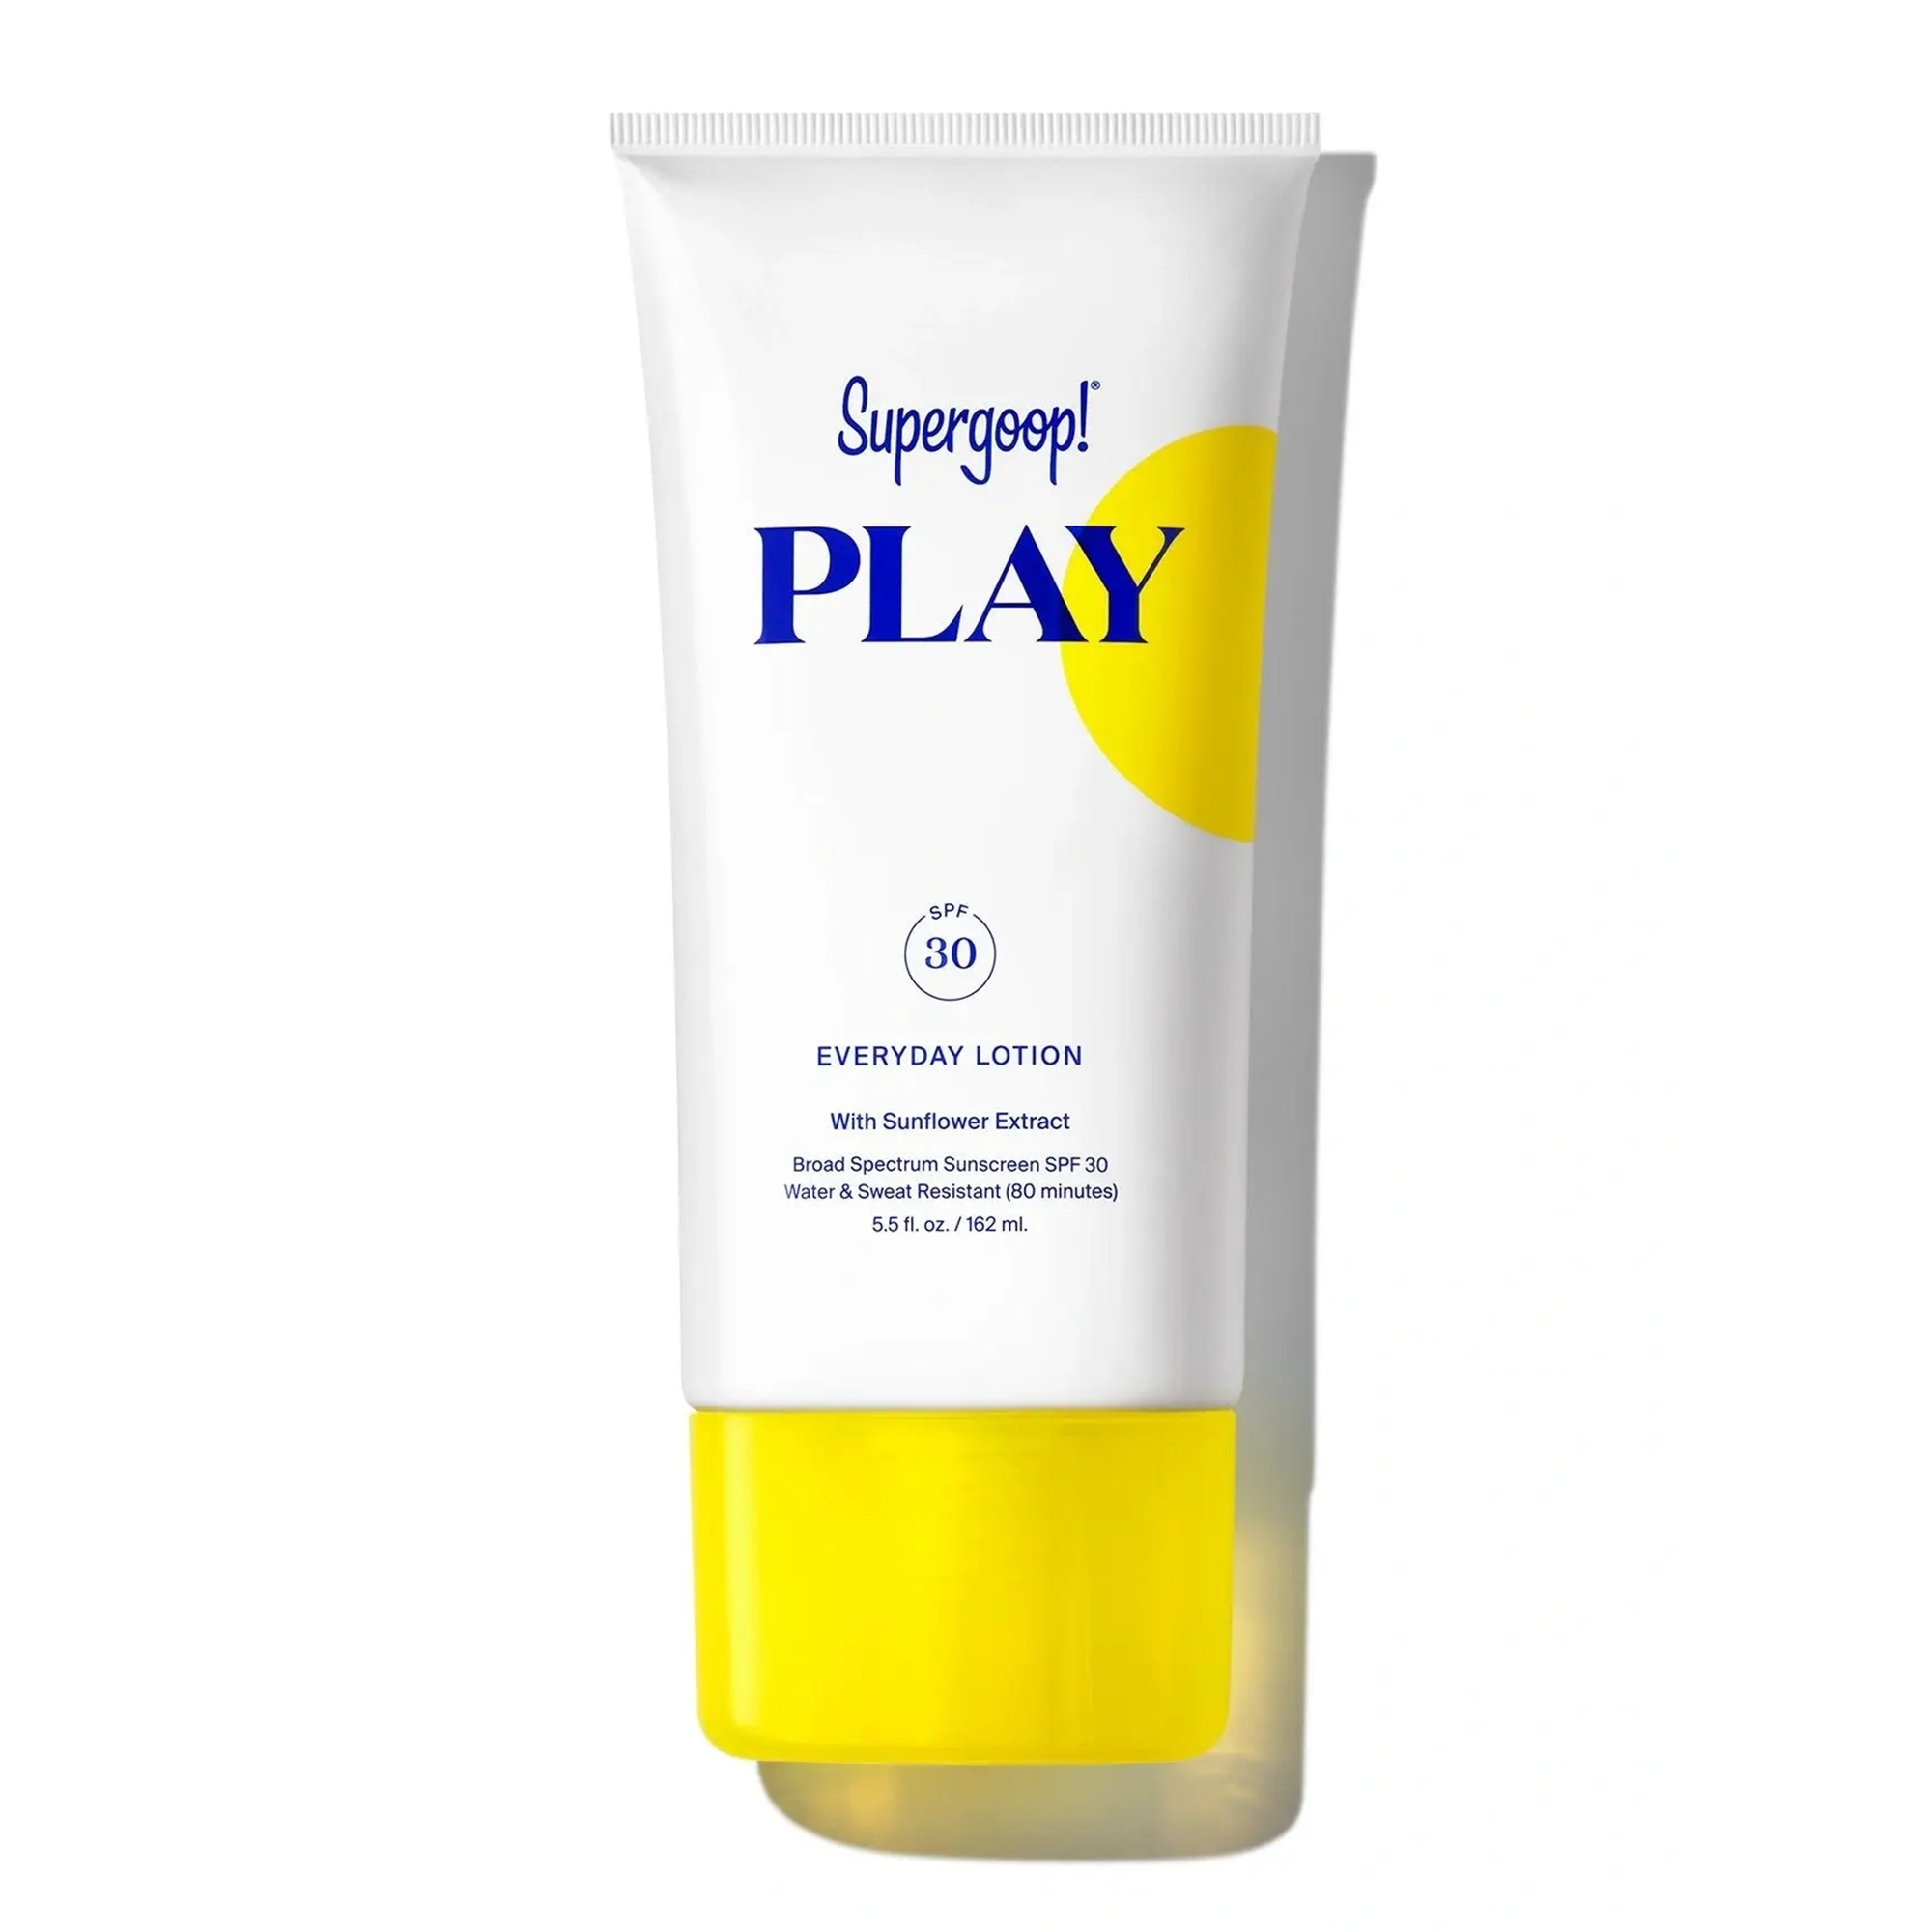 Supergoop! Play Everyday Lotion with Sunflower Extract Broad Spectrum Sunscreen - SPF 30 / 5.5OZ